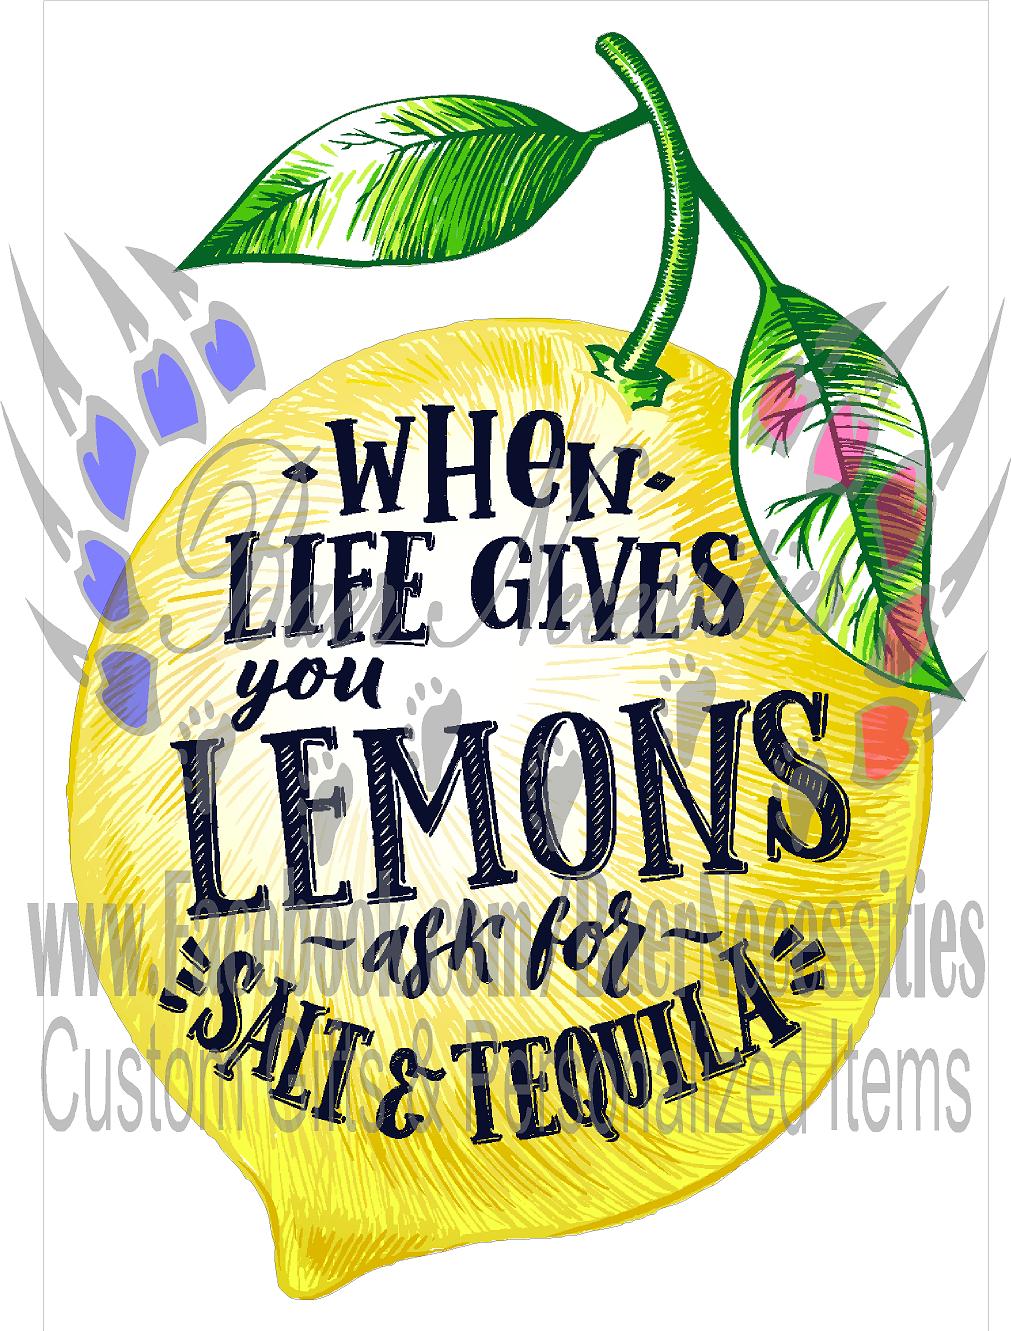 When Life gives you Lemons, ask for salt & tequila - Tumber decal